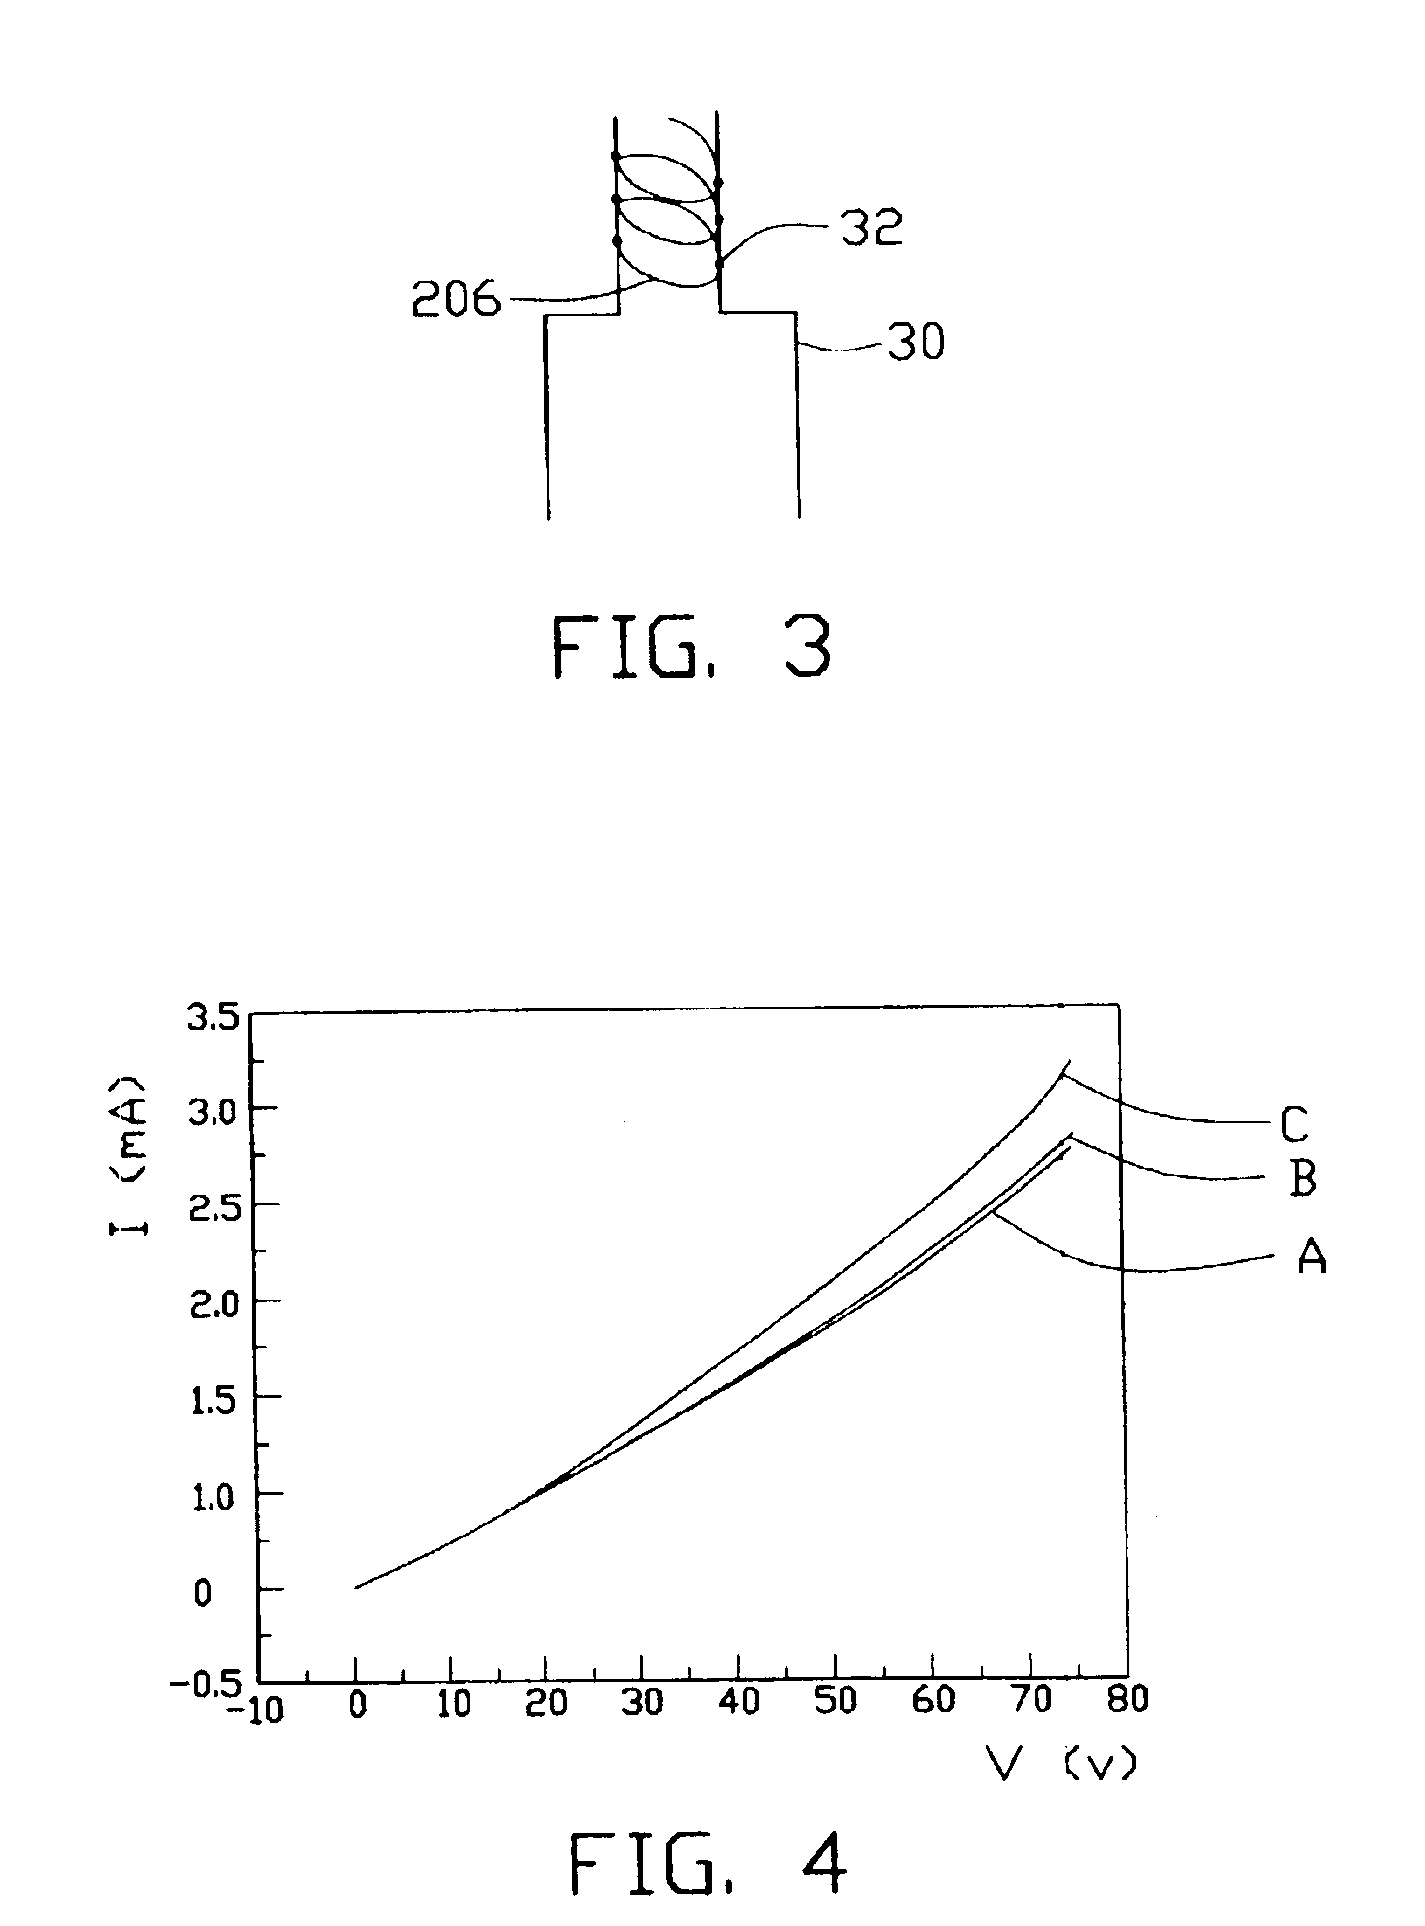 Method of manufacturing a light filament from carbon nanotubes